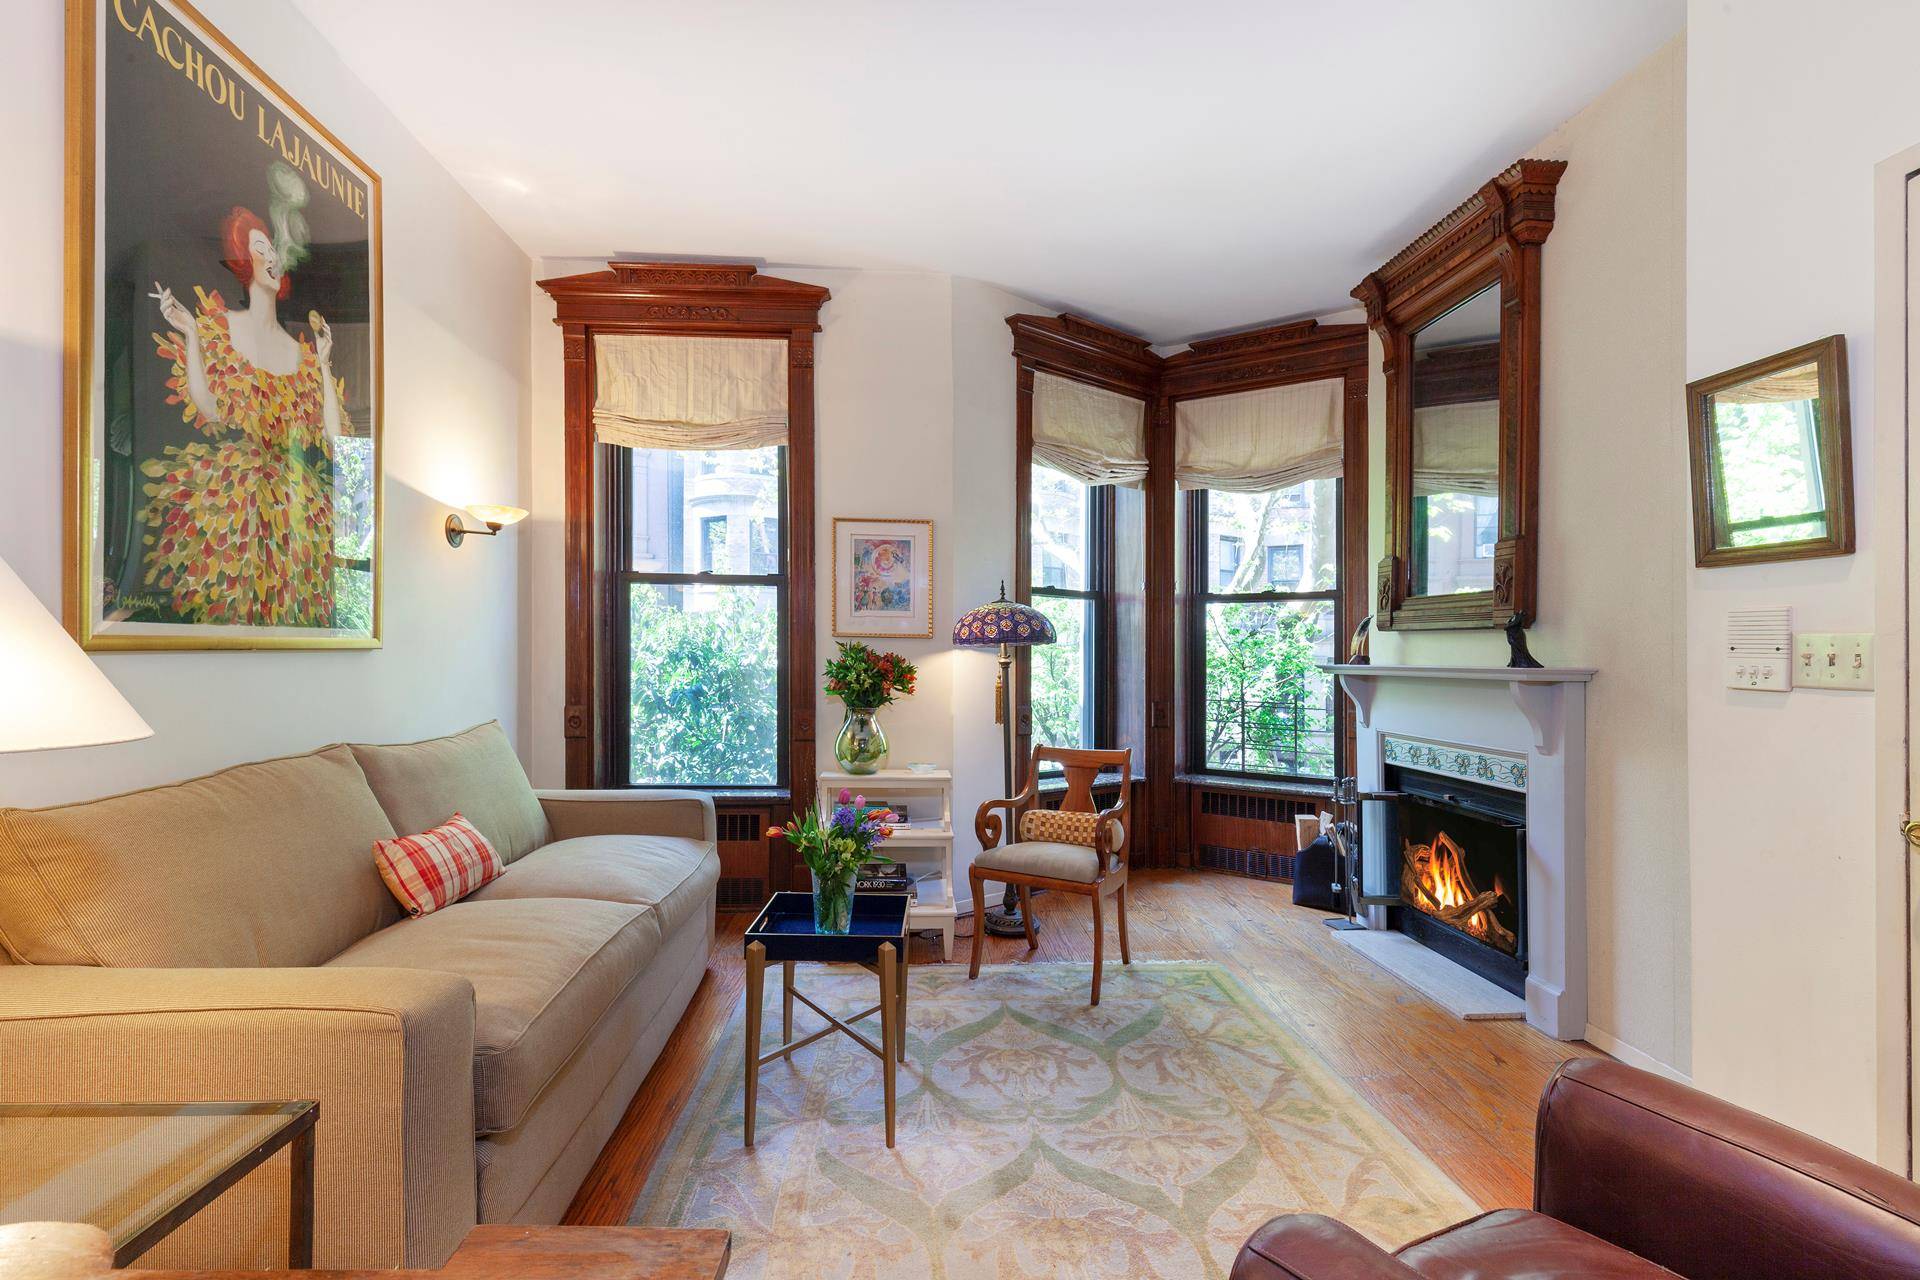 DRAMATIC PARK SLOPE HOME with DRAMATIC REDUCTION TO 899K !